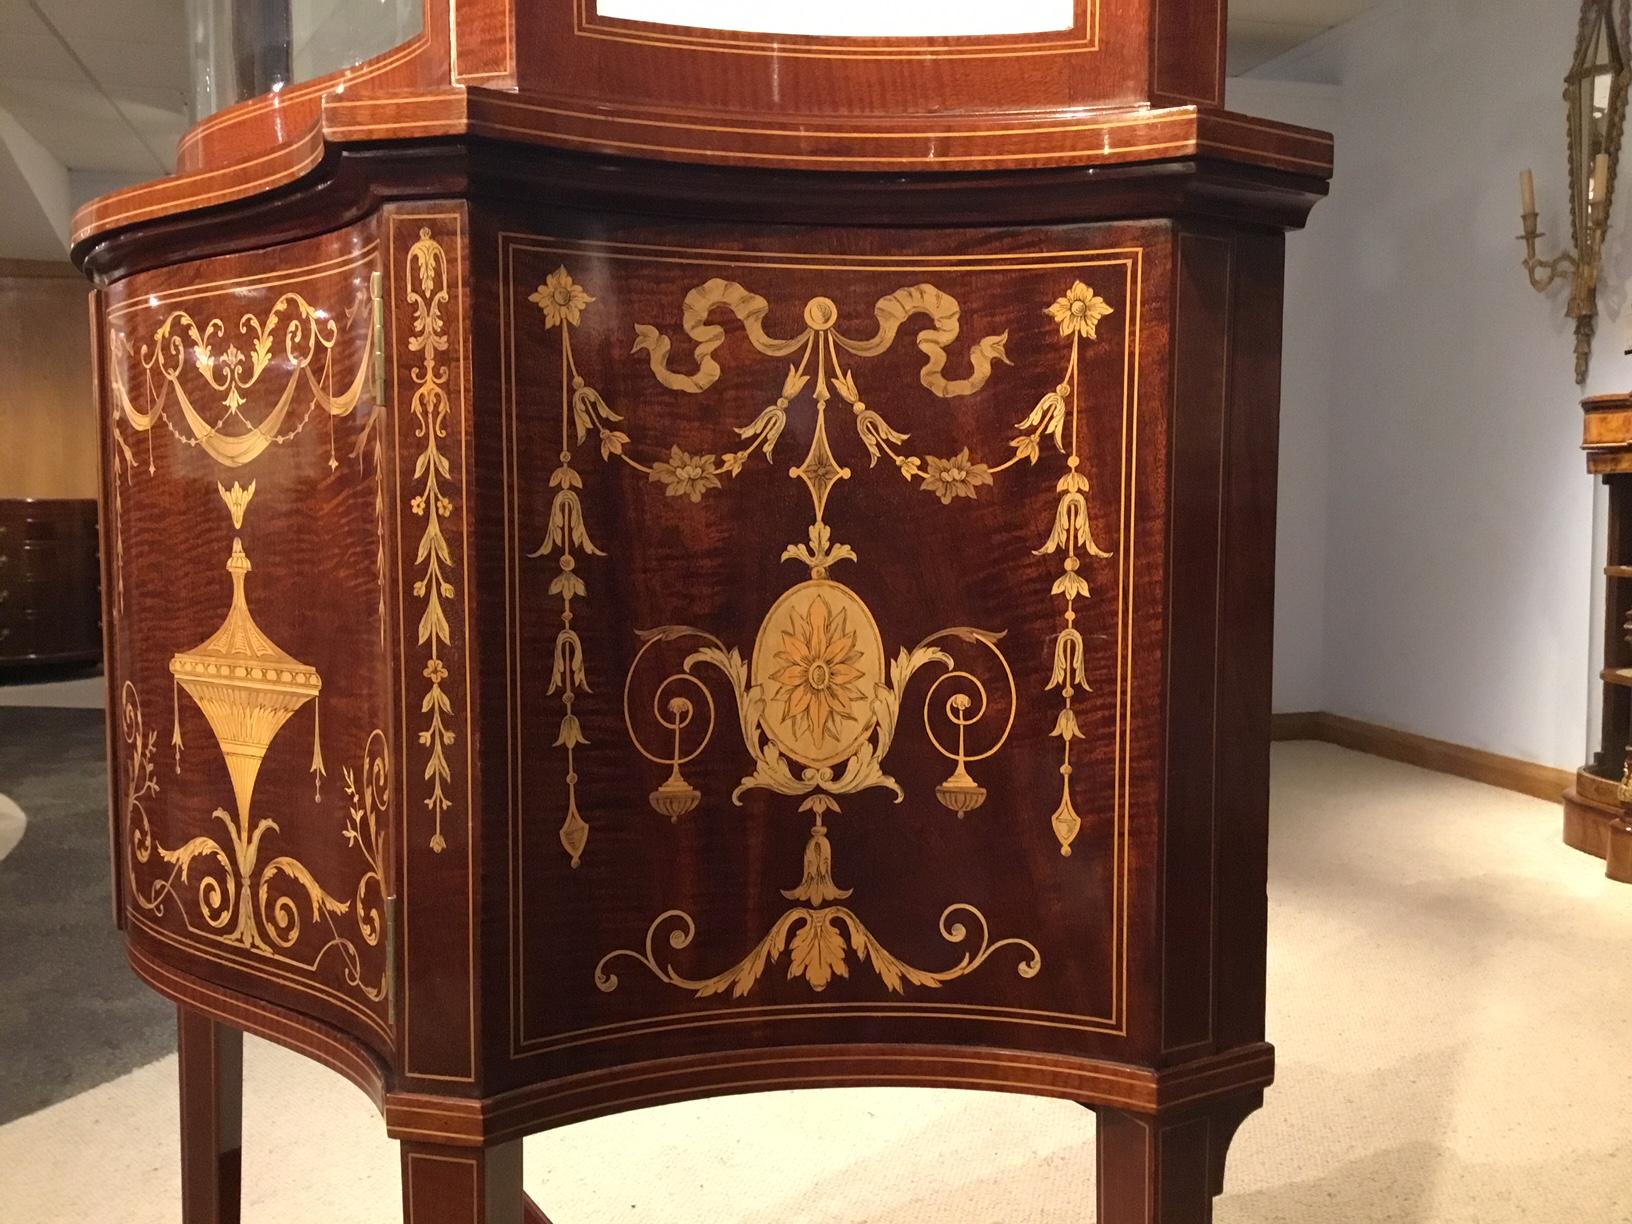  Marquetry Inlaid Edwardian Period Serpentine Cabinet by Maple 8